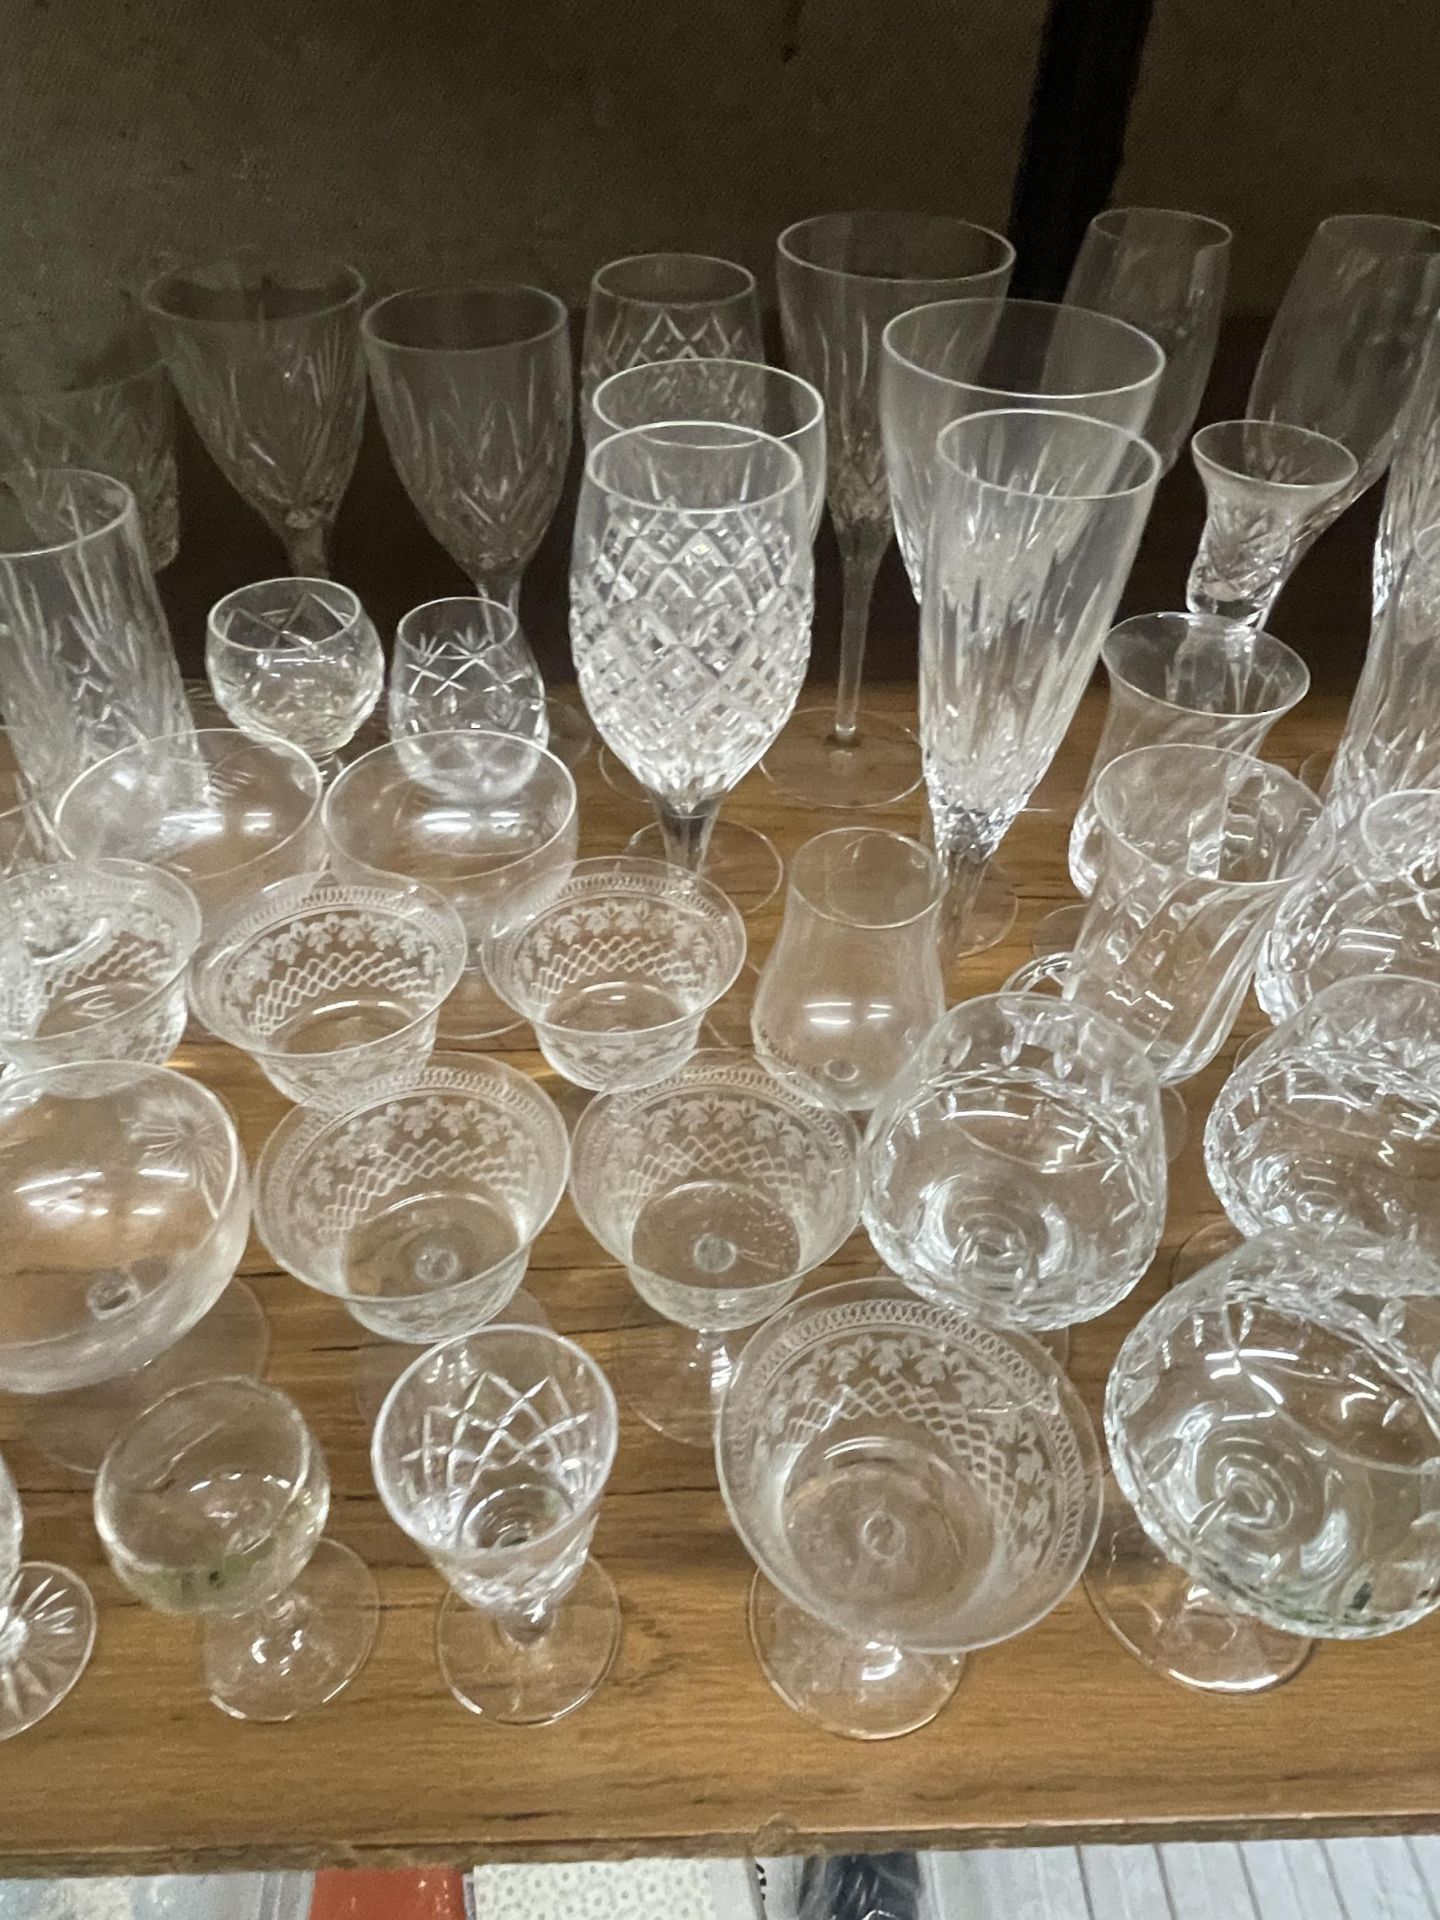 A LARGE COLLECTION OF CUT AND FURTHER GLASS DRINKING GLASSES - Image 3 of 5